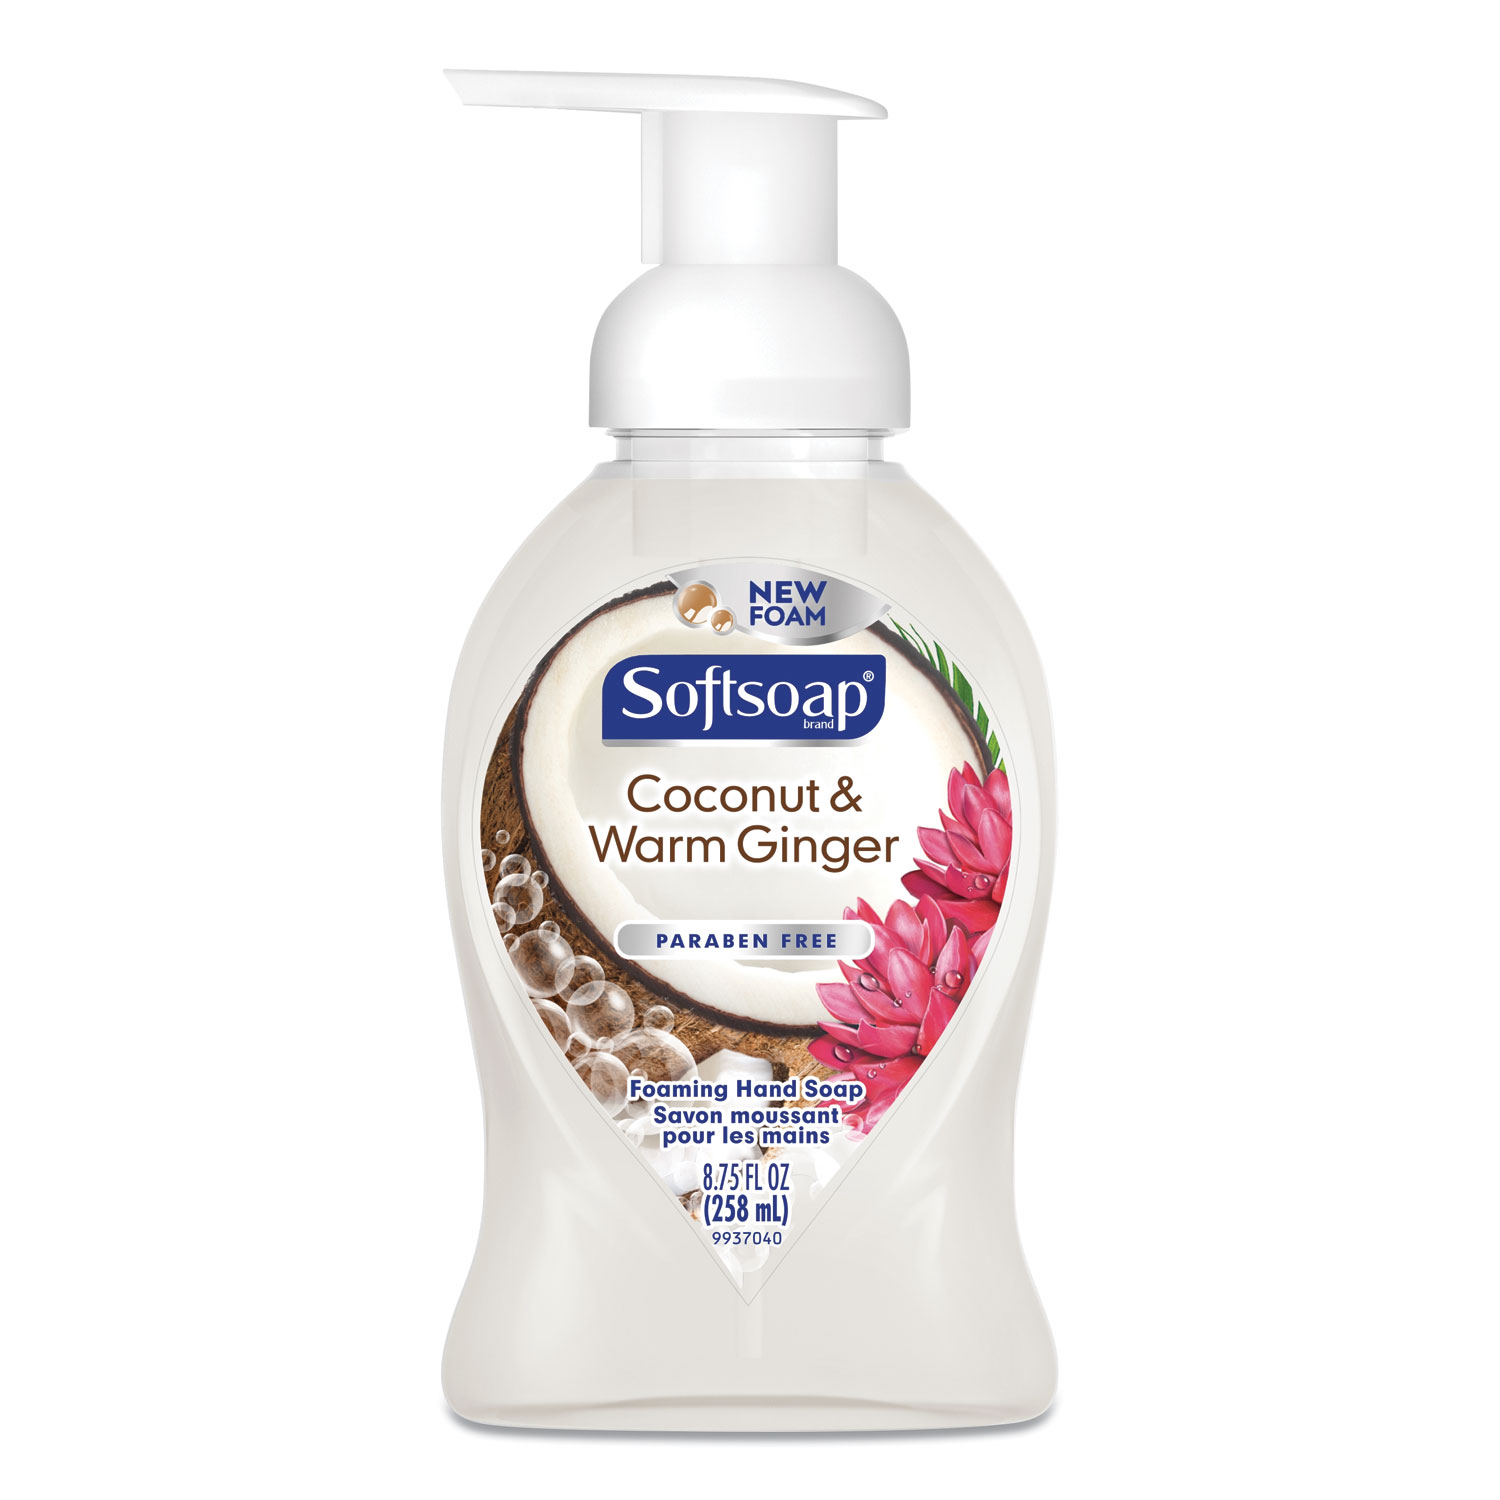  Softsoap US06310A Sensorial Foaming Hand Soap, 8.75 oz Pump Bottle, Coconut and Warm Ginger (CPC96985EA) 